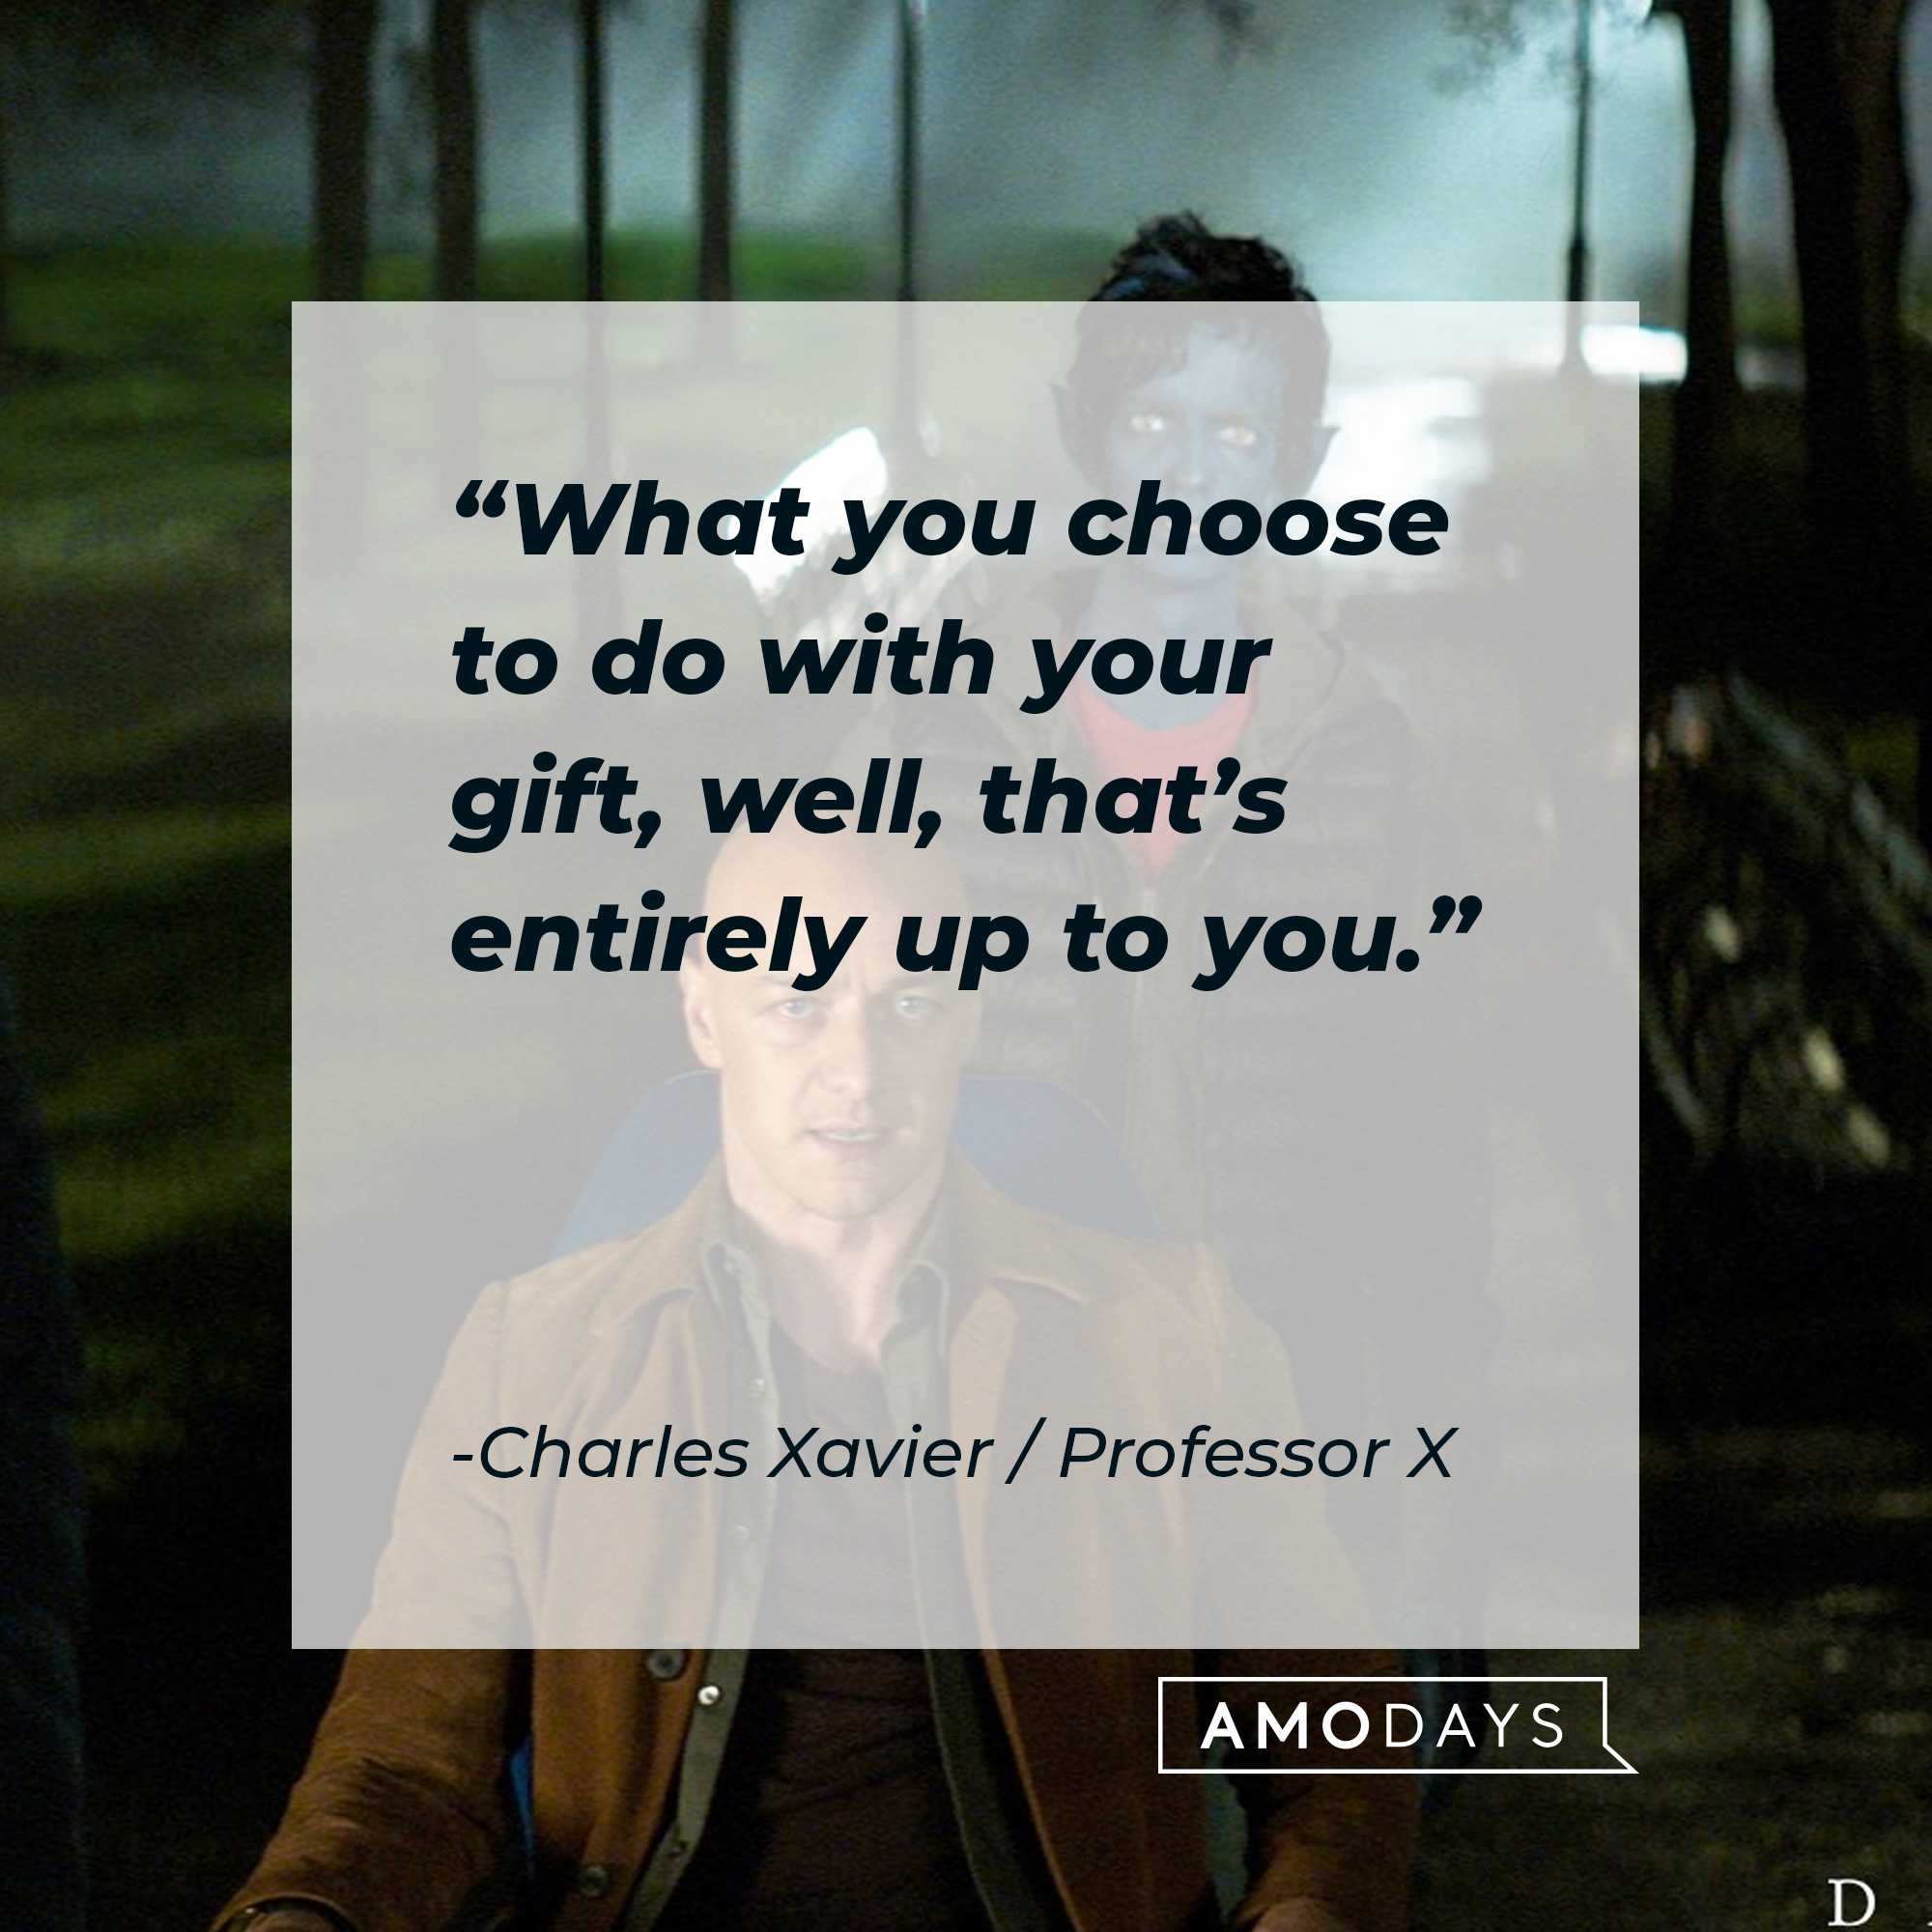 An image of a young Charles Xavier / Professor X, with his quote: "What you choose to do with your gift, well, that’s entirely up to you." | Source: Facebook.com/xmenmovies